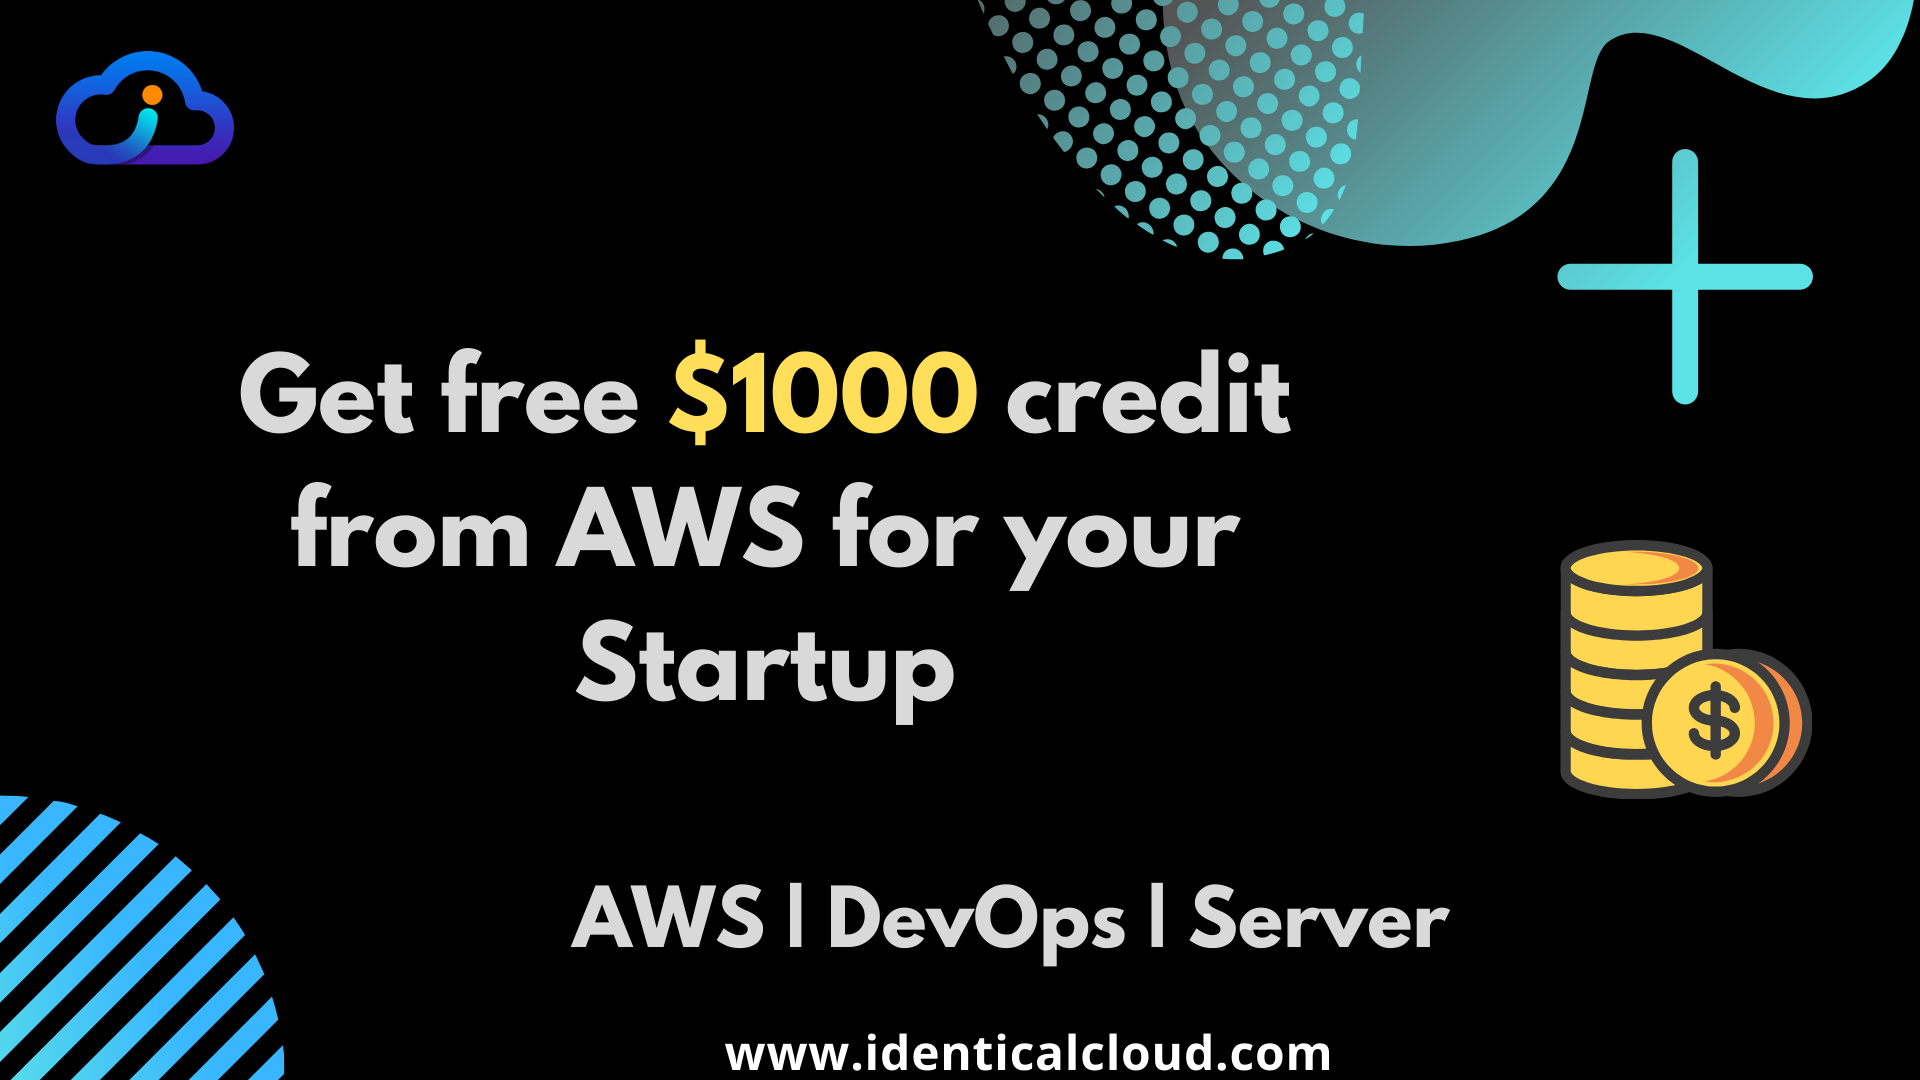 Get free $1000 credit from AWS for your Startup